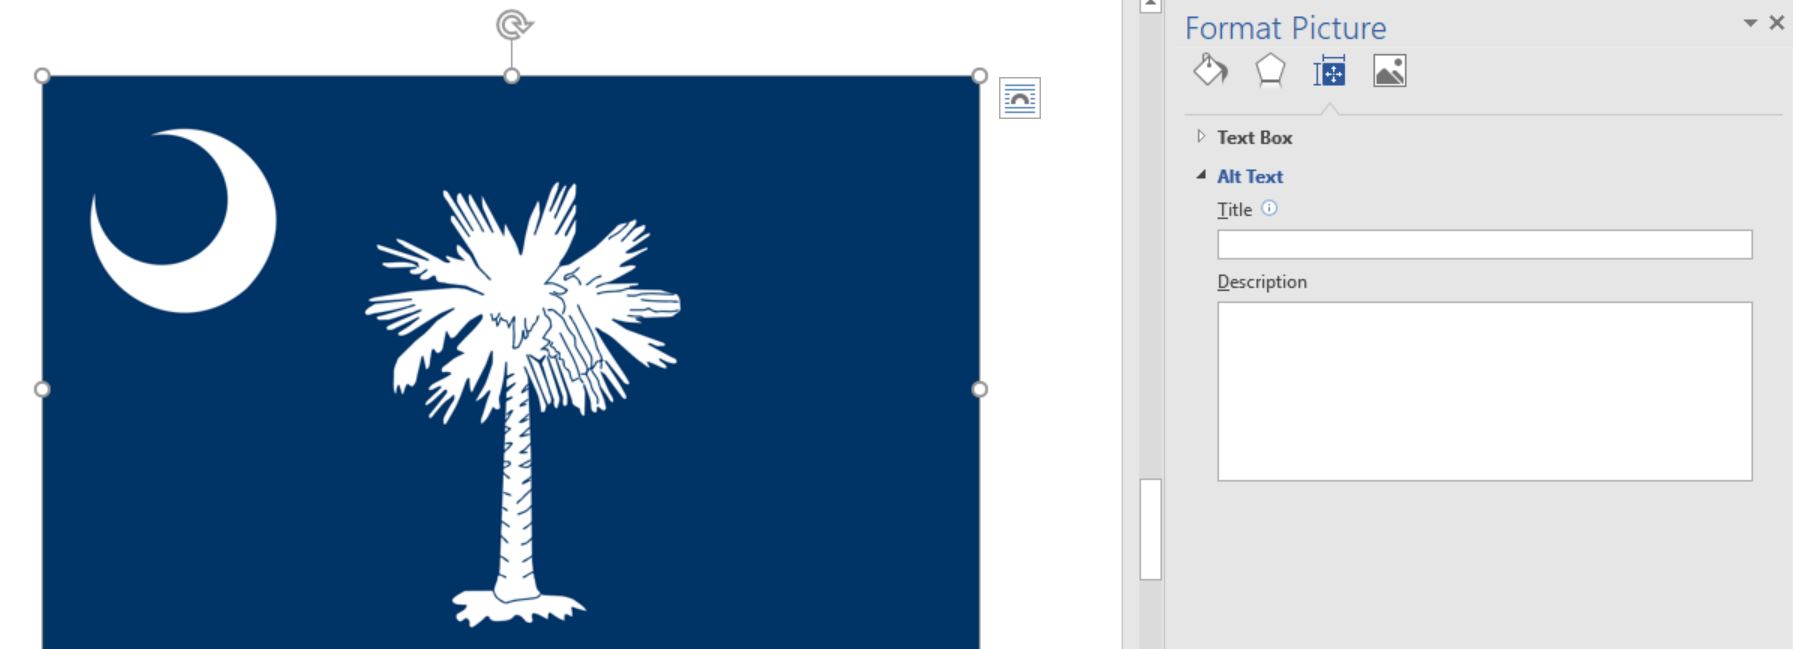 Screenshot of a South Carolina flag image in a Word document. There is an option to add alt text to the image on the right under "format picture."